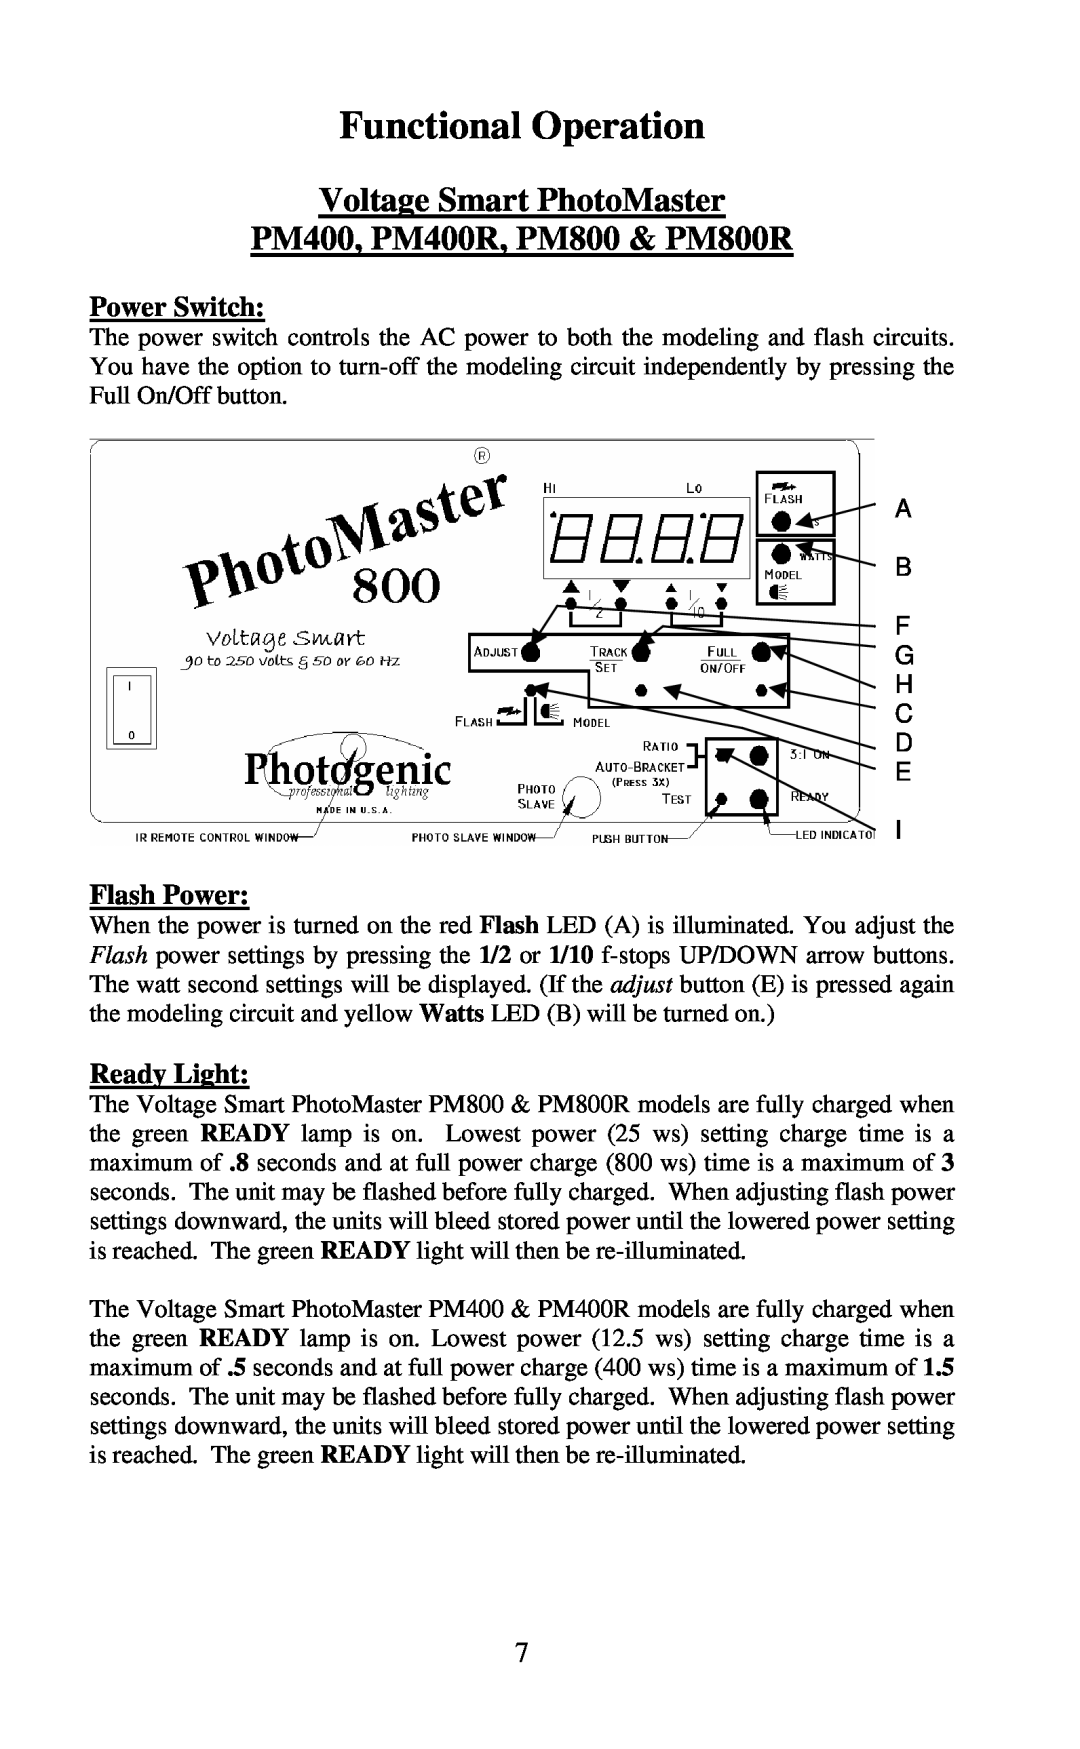 Photogenic Professional Lighting manual Functional Operation, Voltage Smart PhotoMaster PM400, PM400R, PM800 & PM800R 